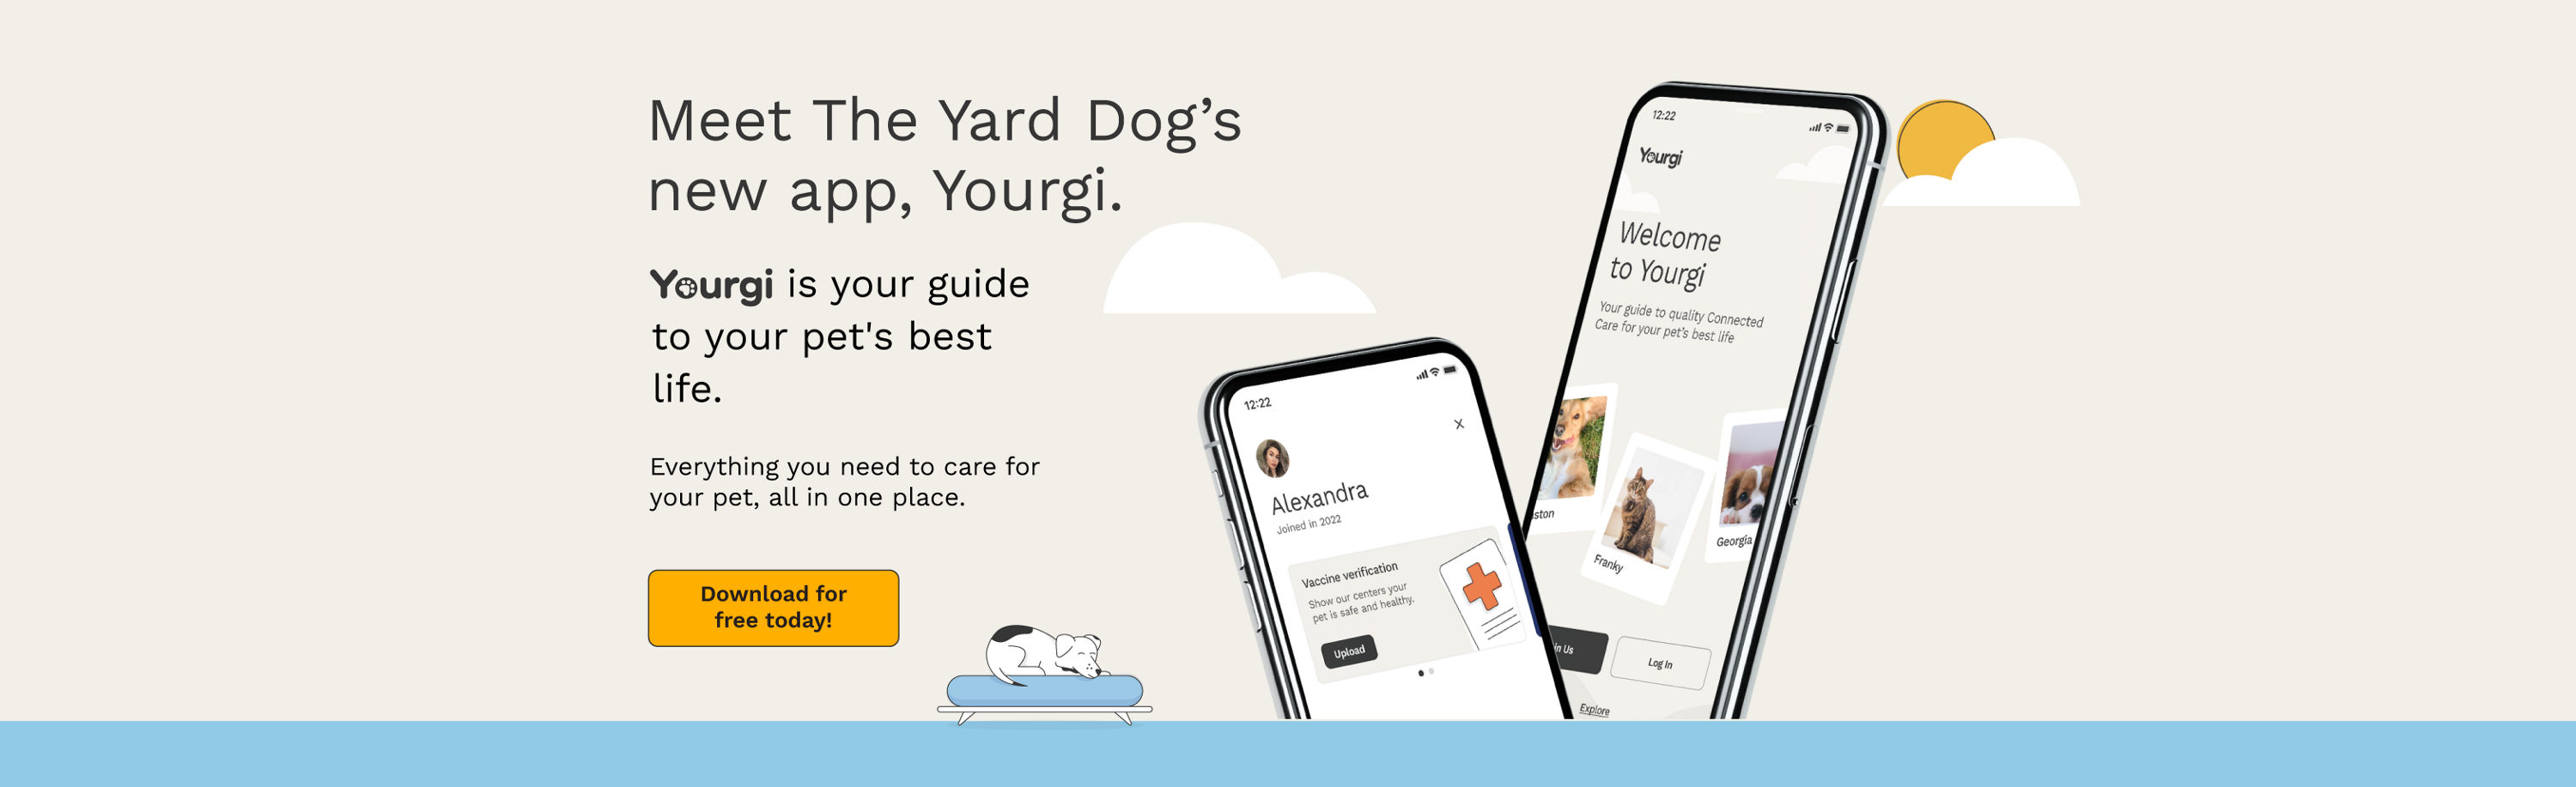 Meet The Yard Dog's new app, Yourgi.